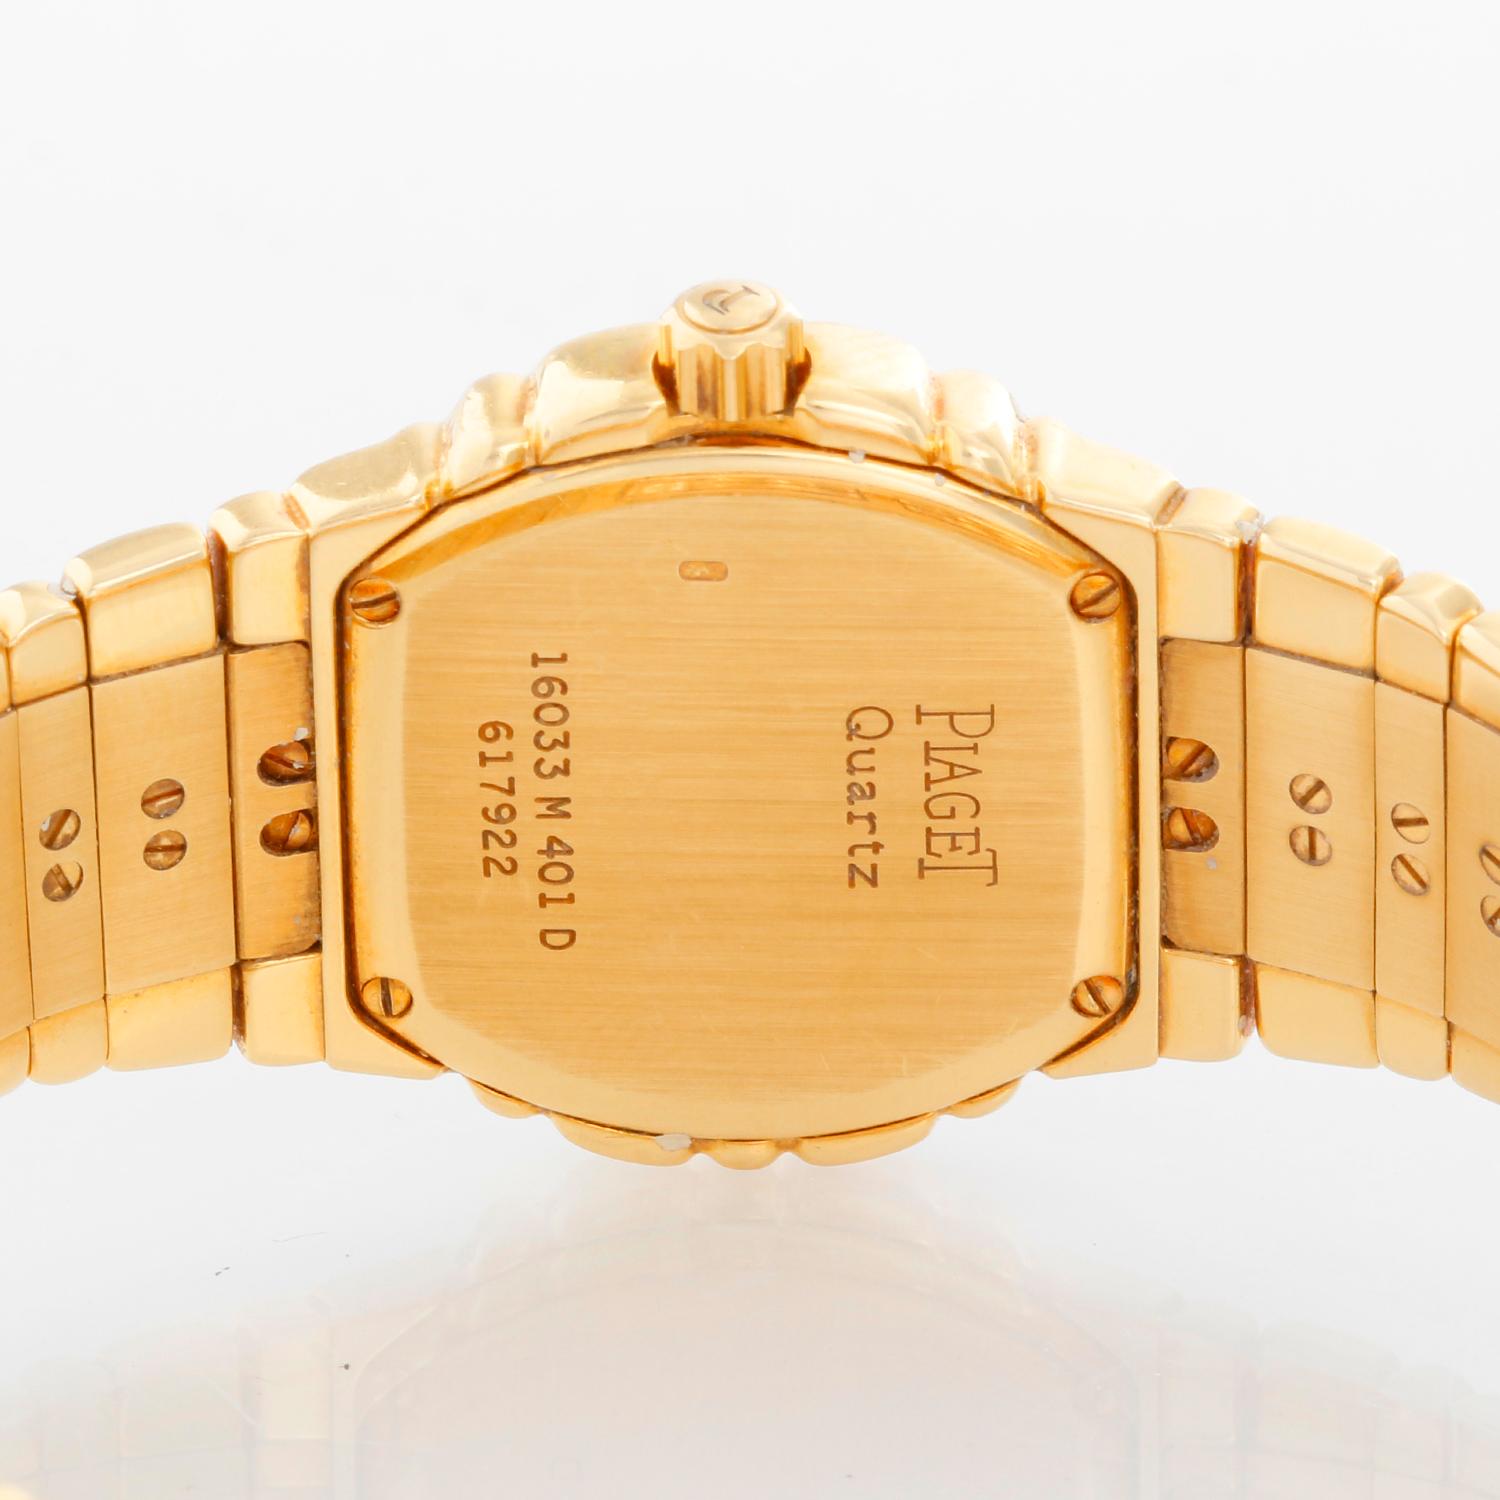 Ladies Piaget Tanagra 18K Yellow Gold Watch In Excellent Condition For Sale In Dallas, TX